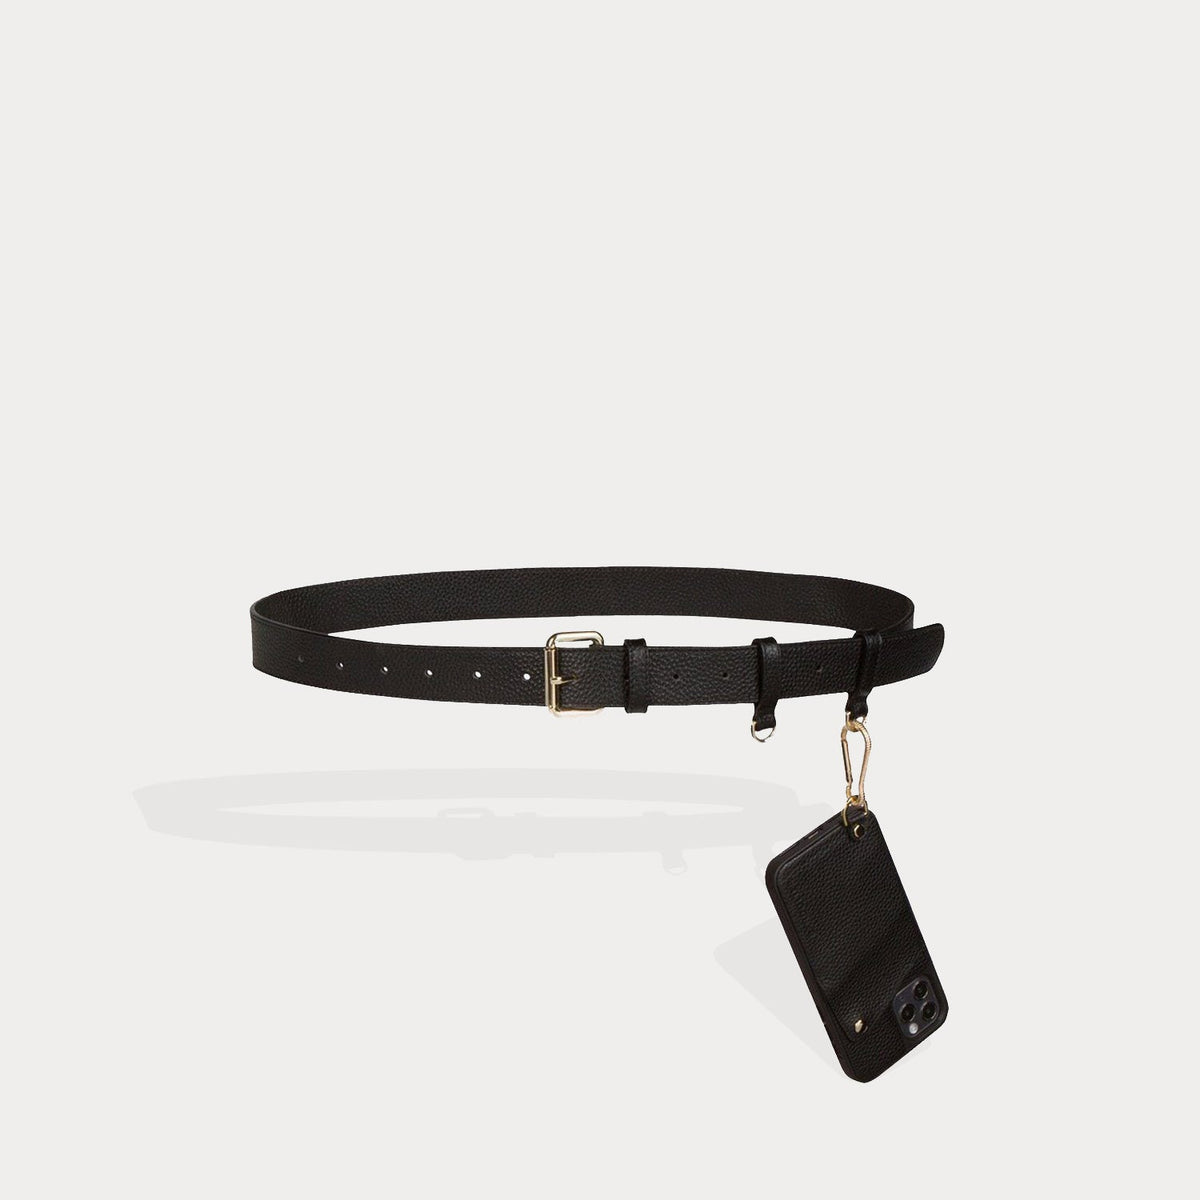 Patent leather belt Louis Vuitton Black size Not specified